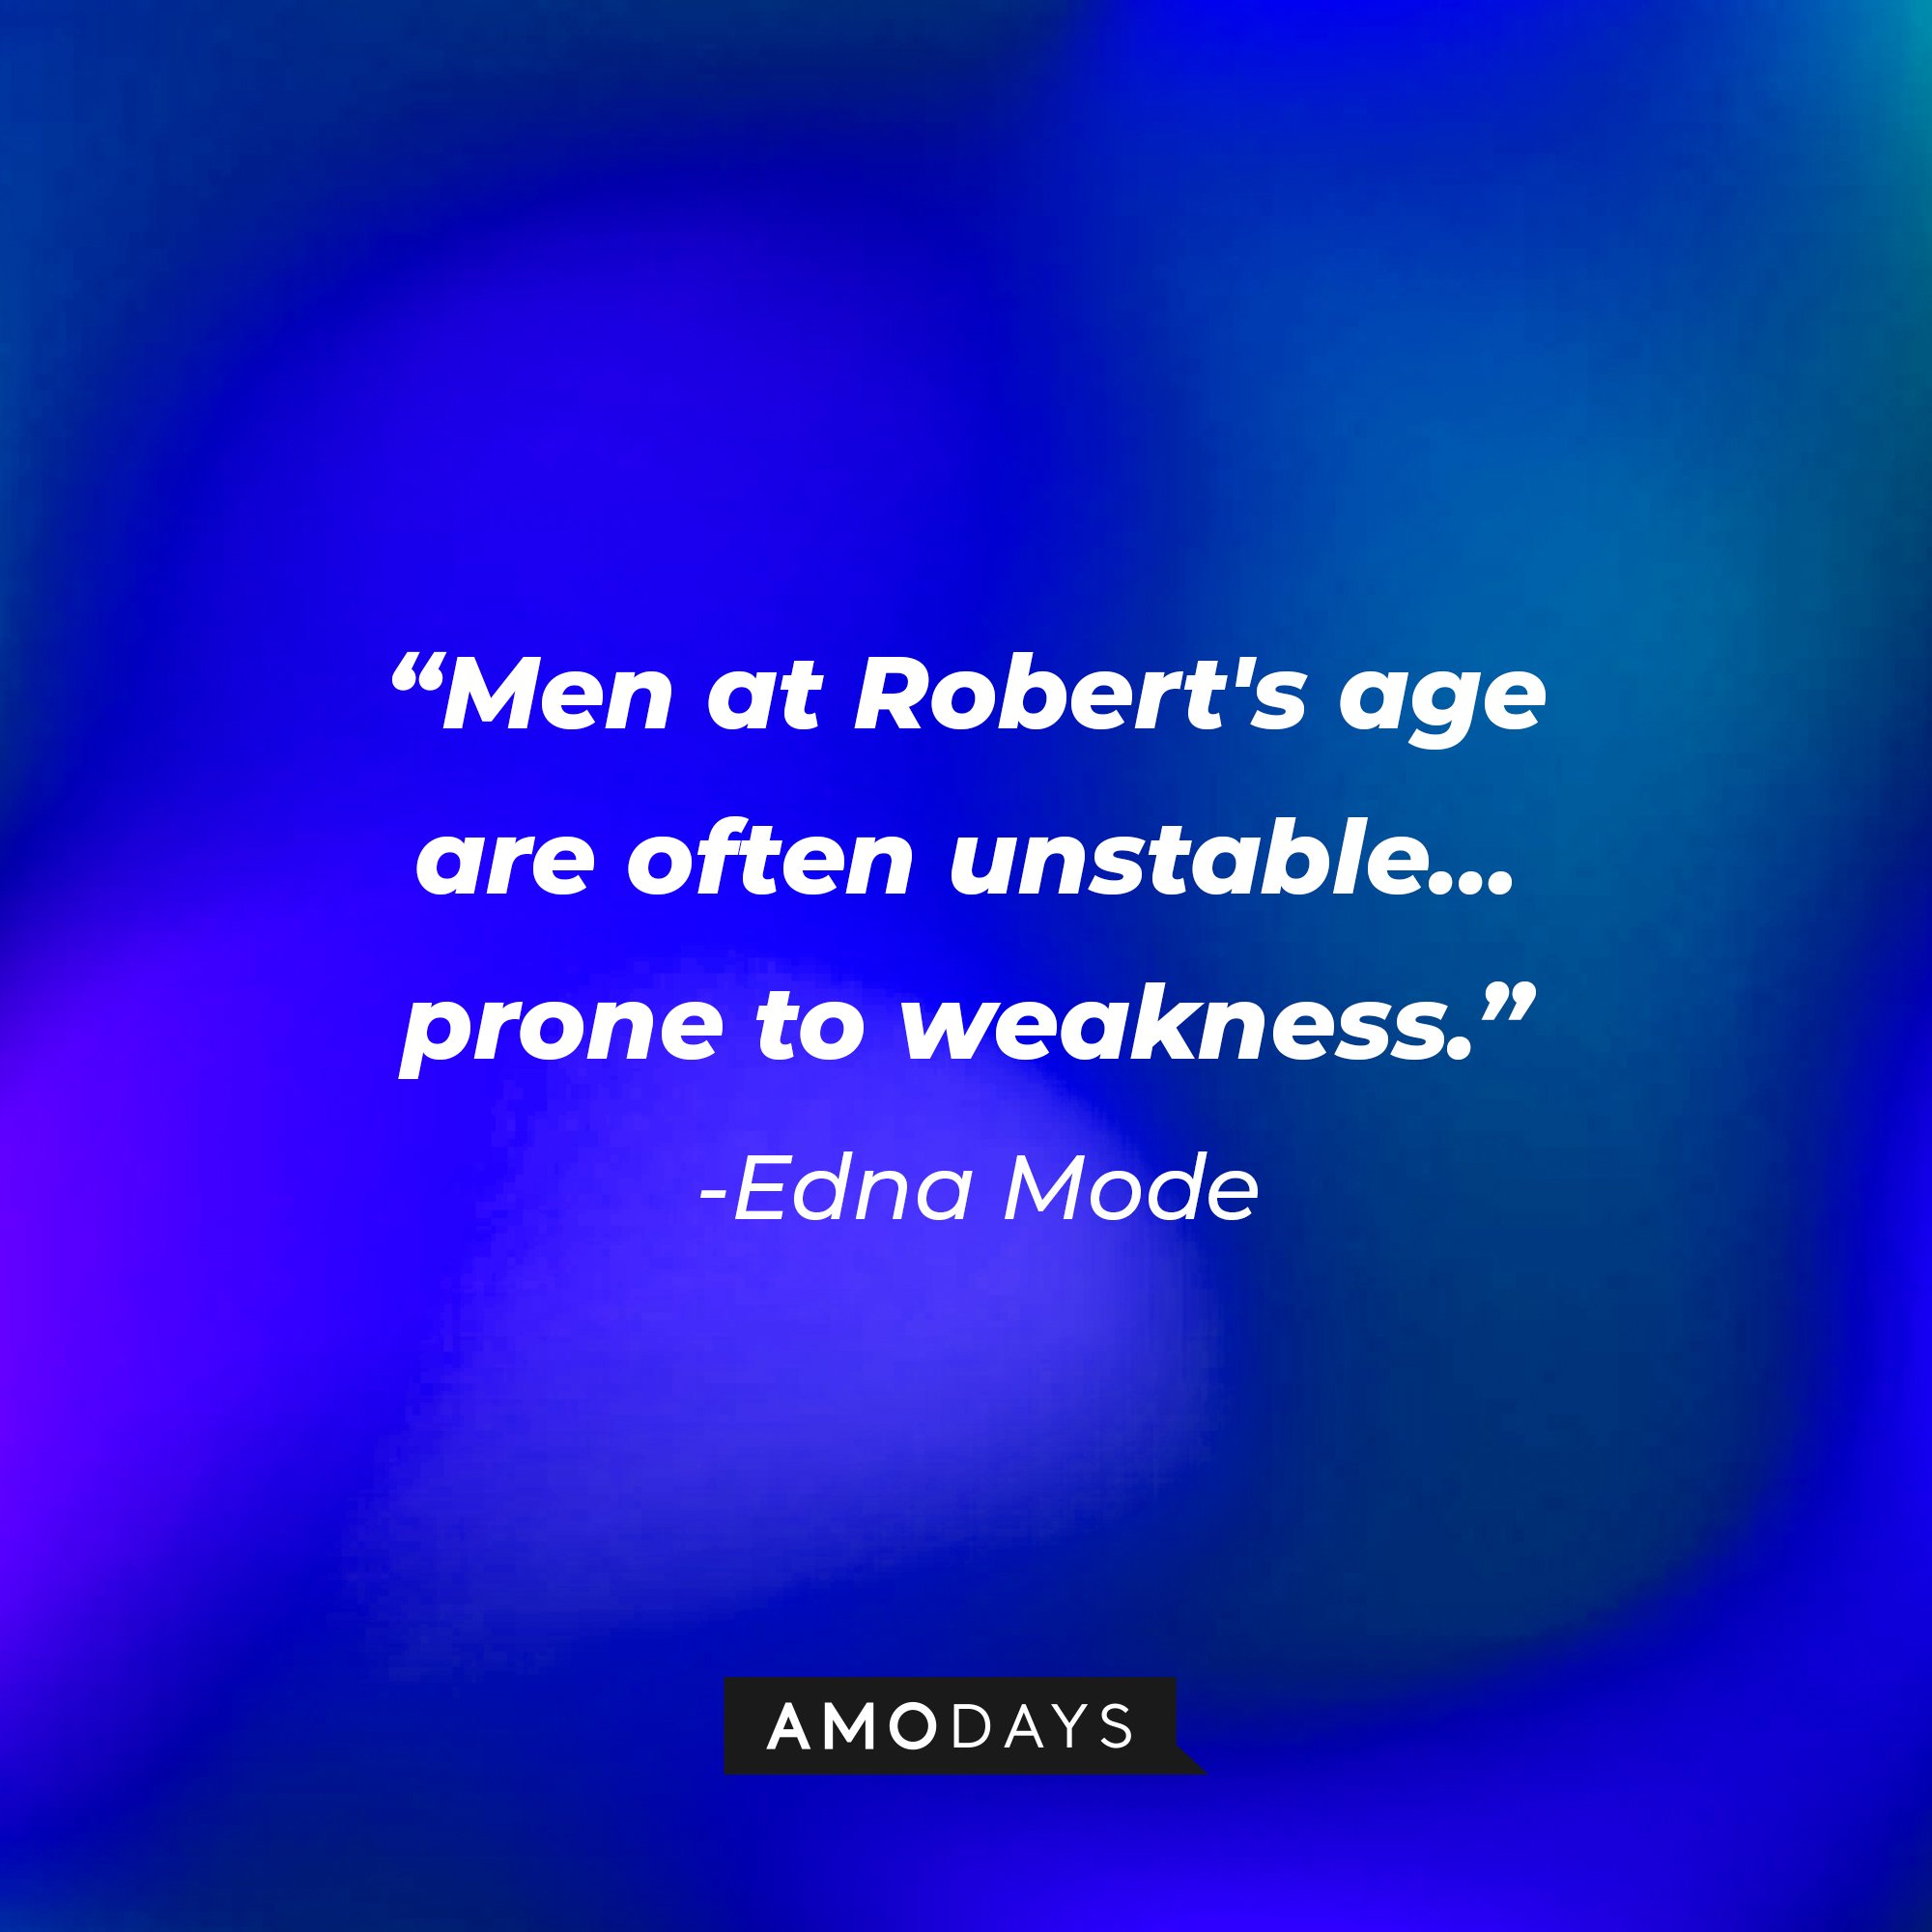   Edna Mode’s quote: "Men at Robert's age are often unstable… prone to weakness." | Image: AmoDays 